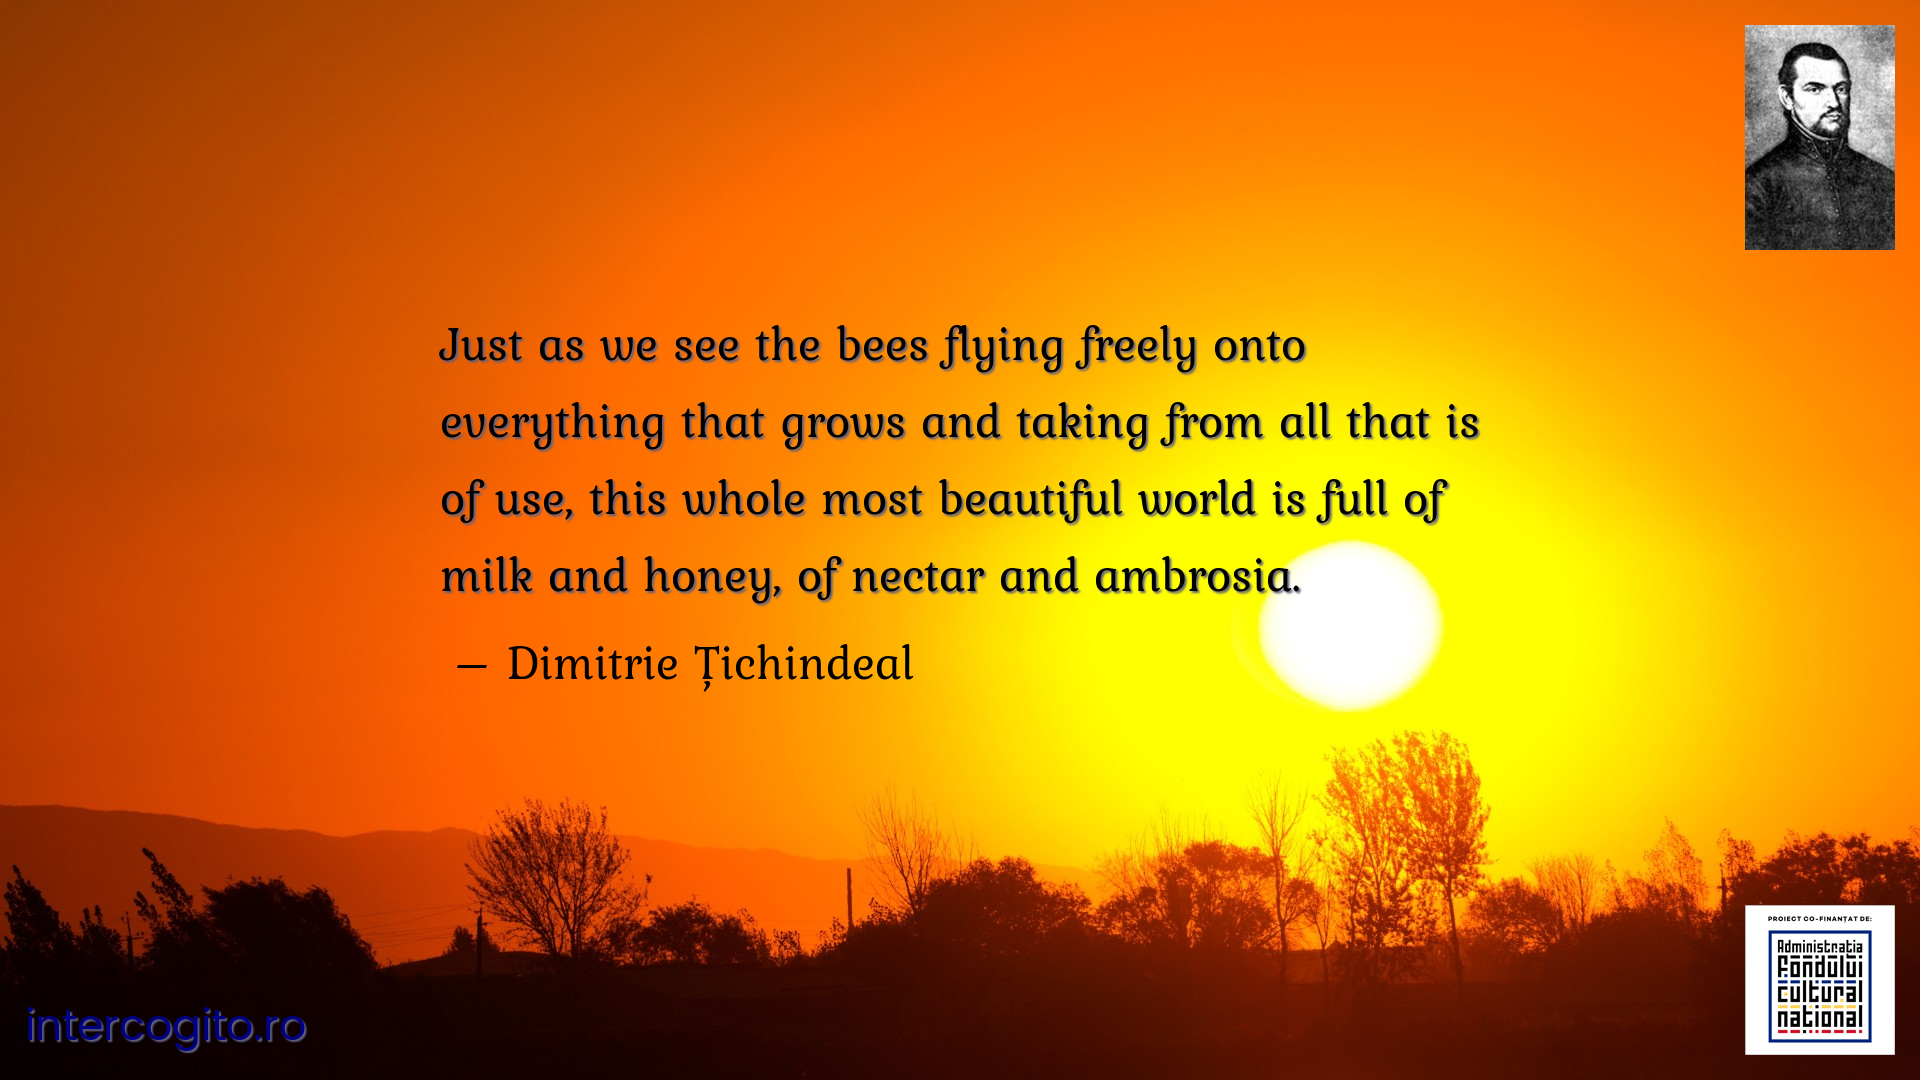 Just as we see the bees flying freely onto everything that grows and taking from all that is of use, this whole most beautiful world is full of milk and honey, of nectar and ambrosia.